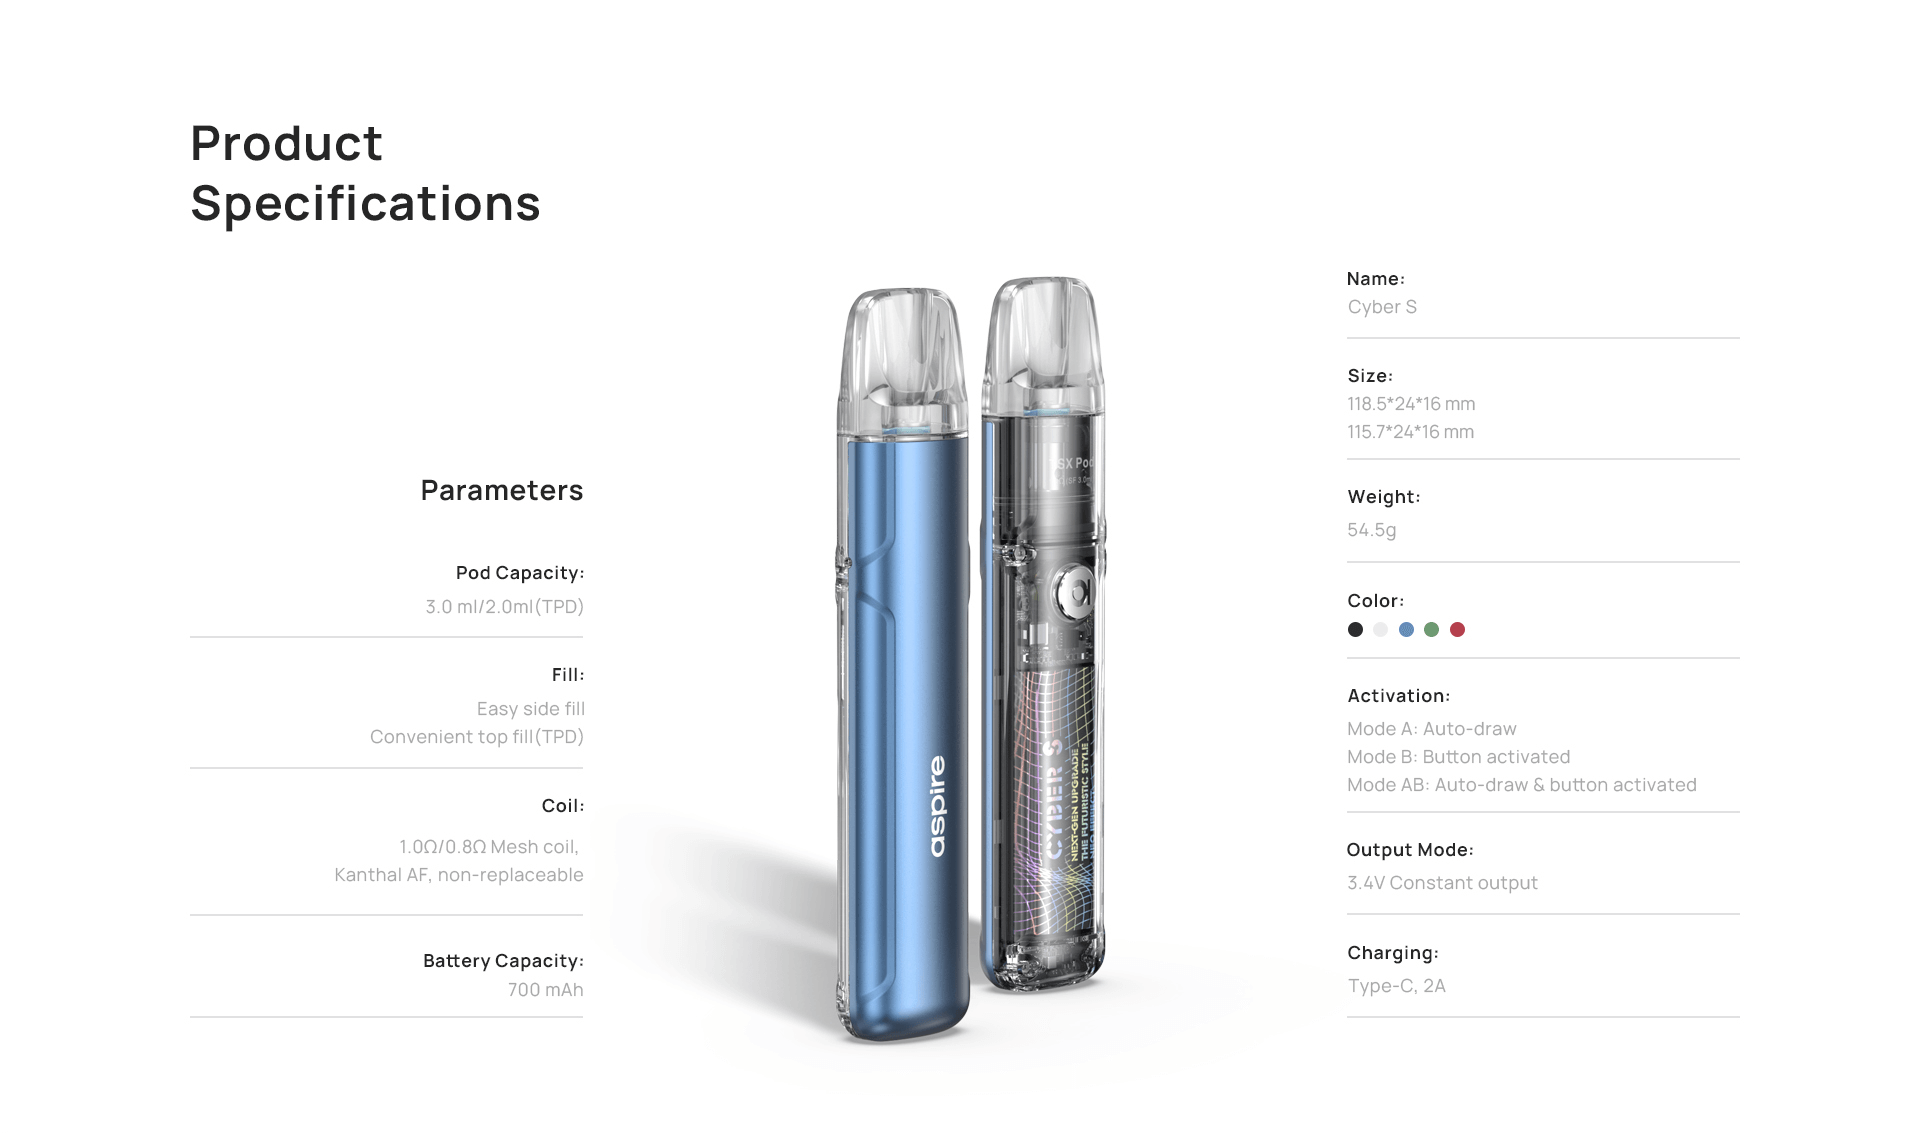 Aspire Cyber S Product Specifications